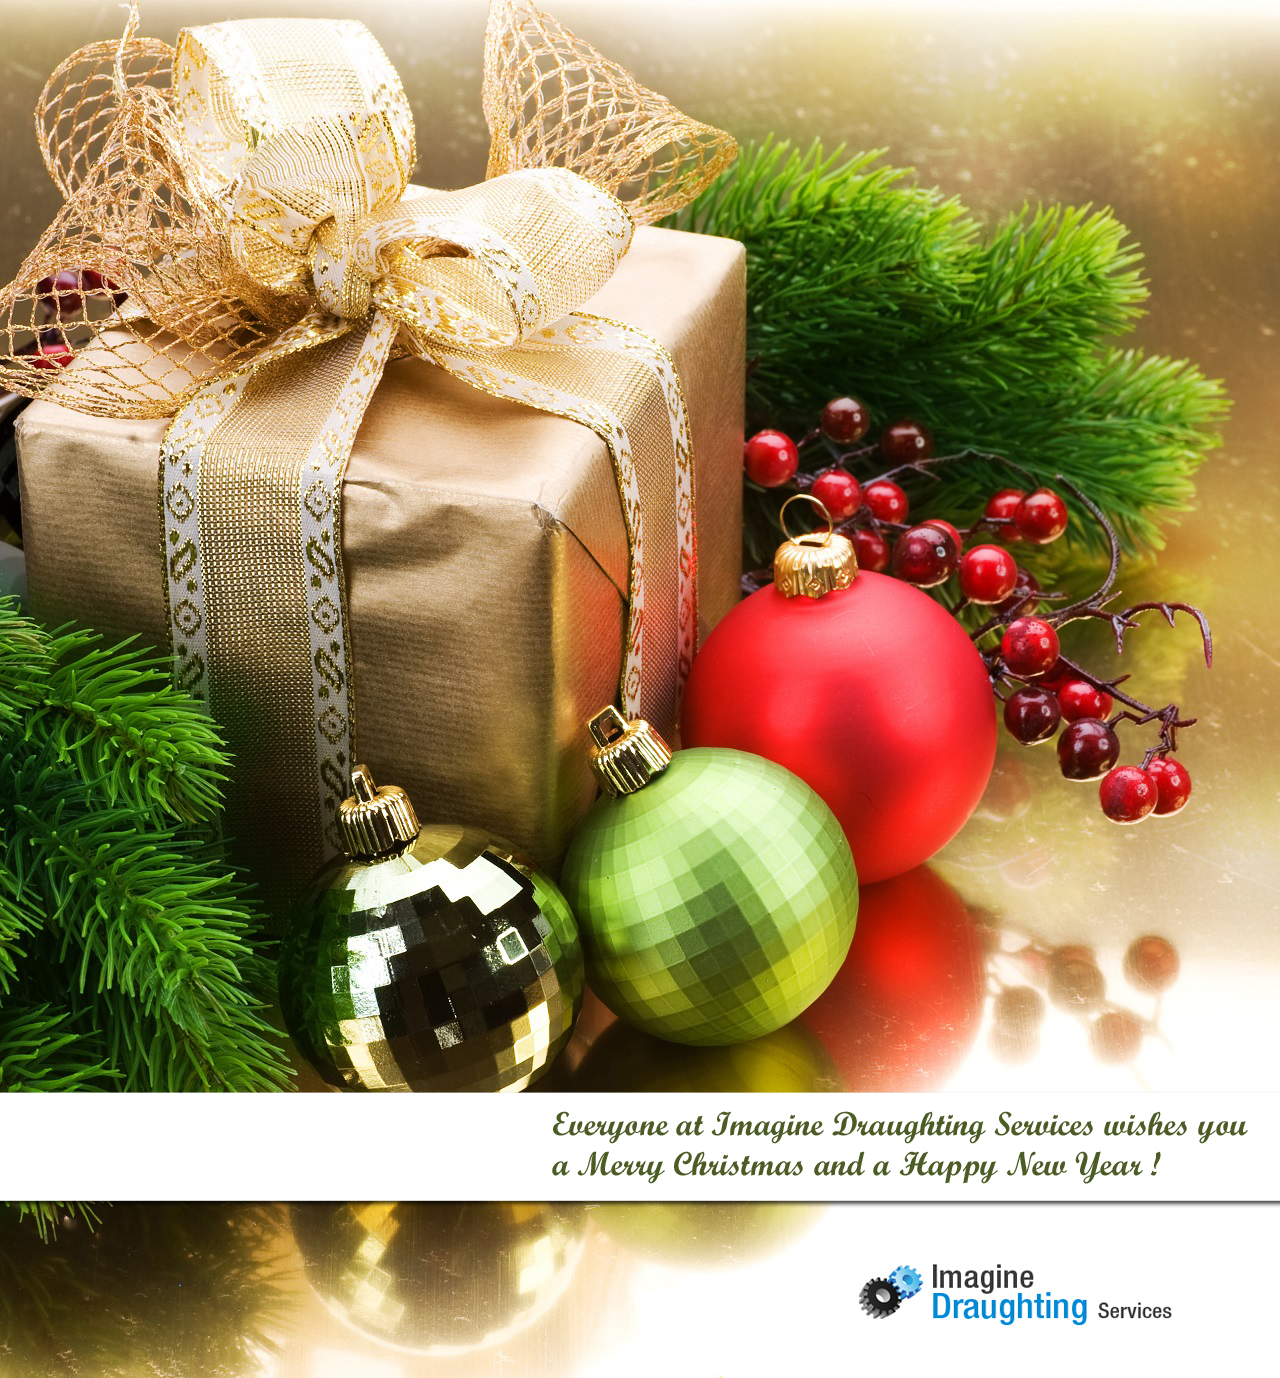 christmas-wishes-imagine-draughting-services